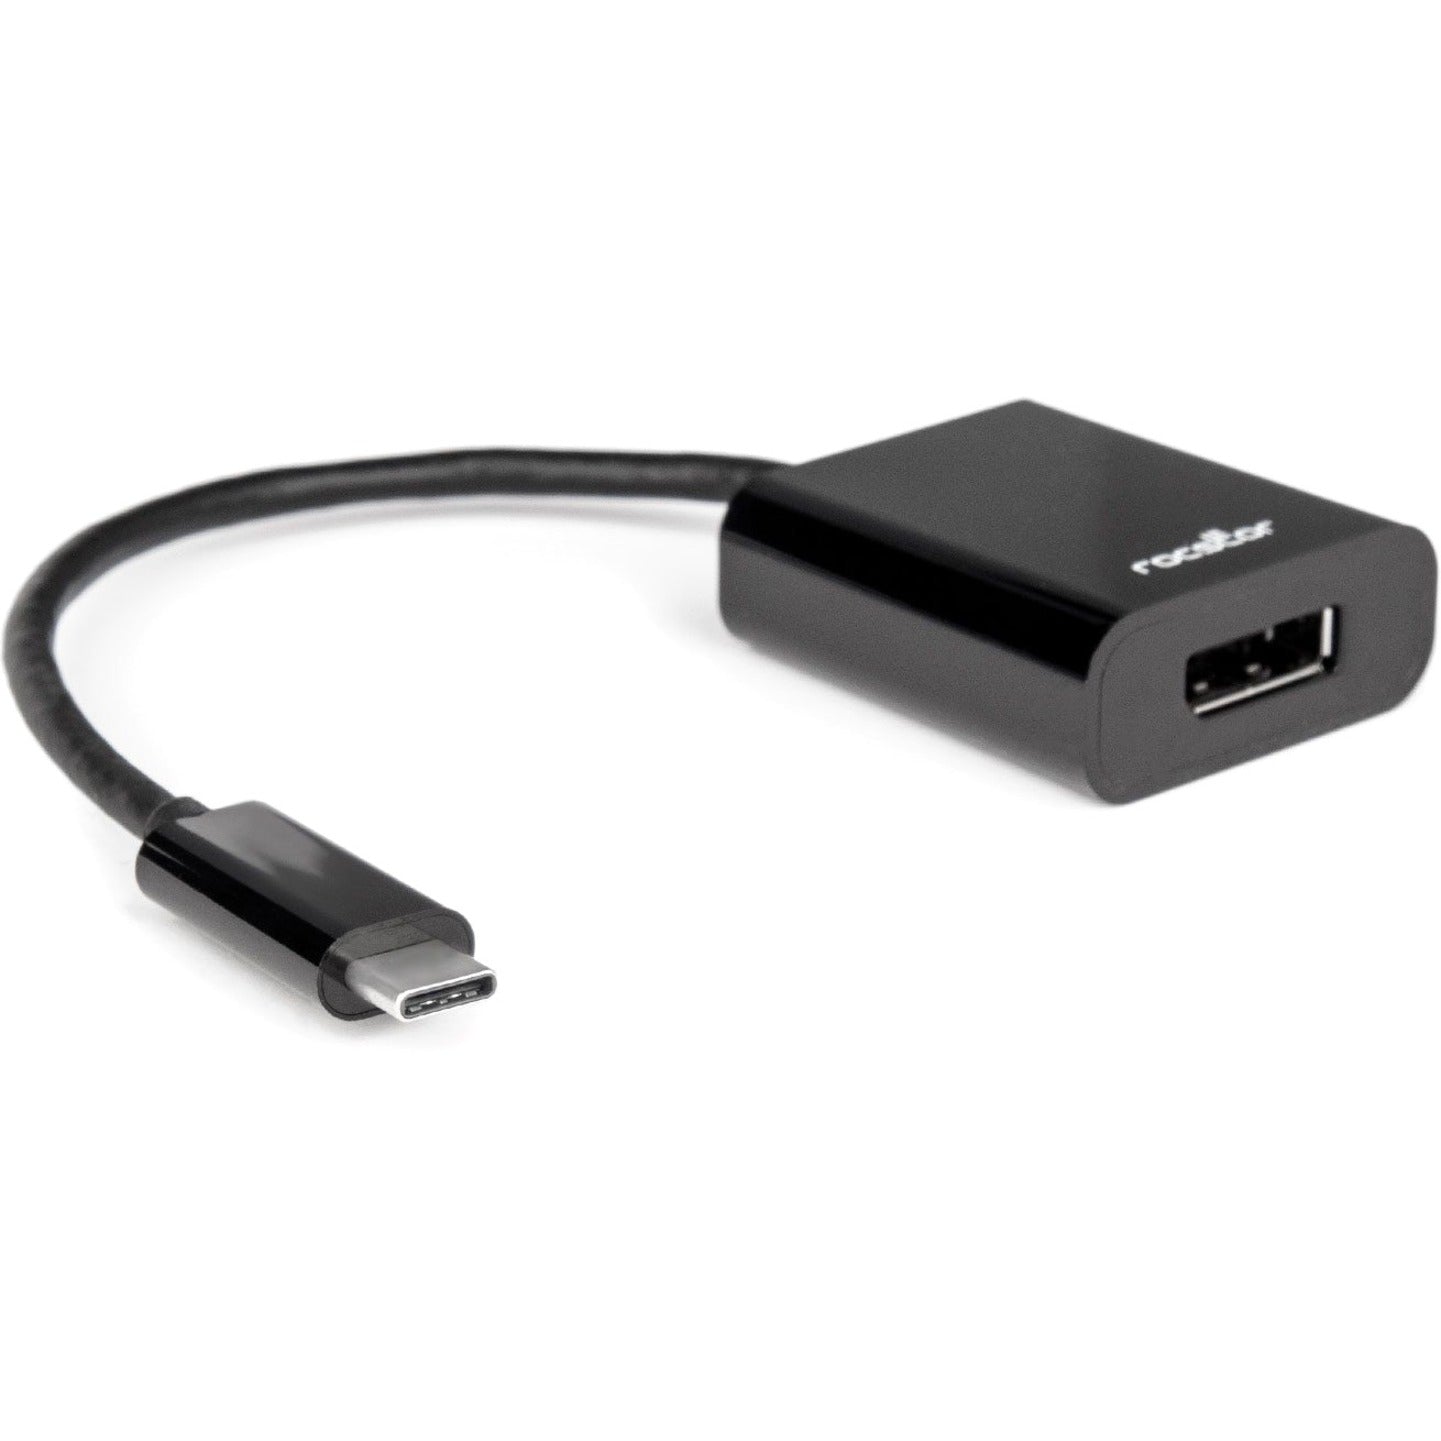 Rocstor Y10A237-B1 USB-C to DisplayPort Adapter - 4K 60Hz, Reversible, Plug and Play, HDR Support, HDCP